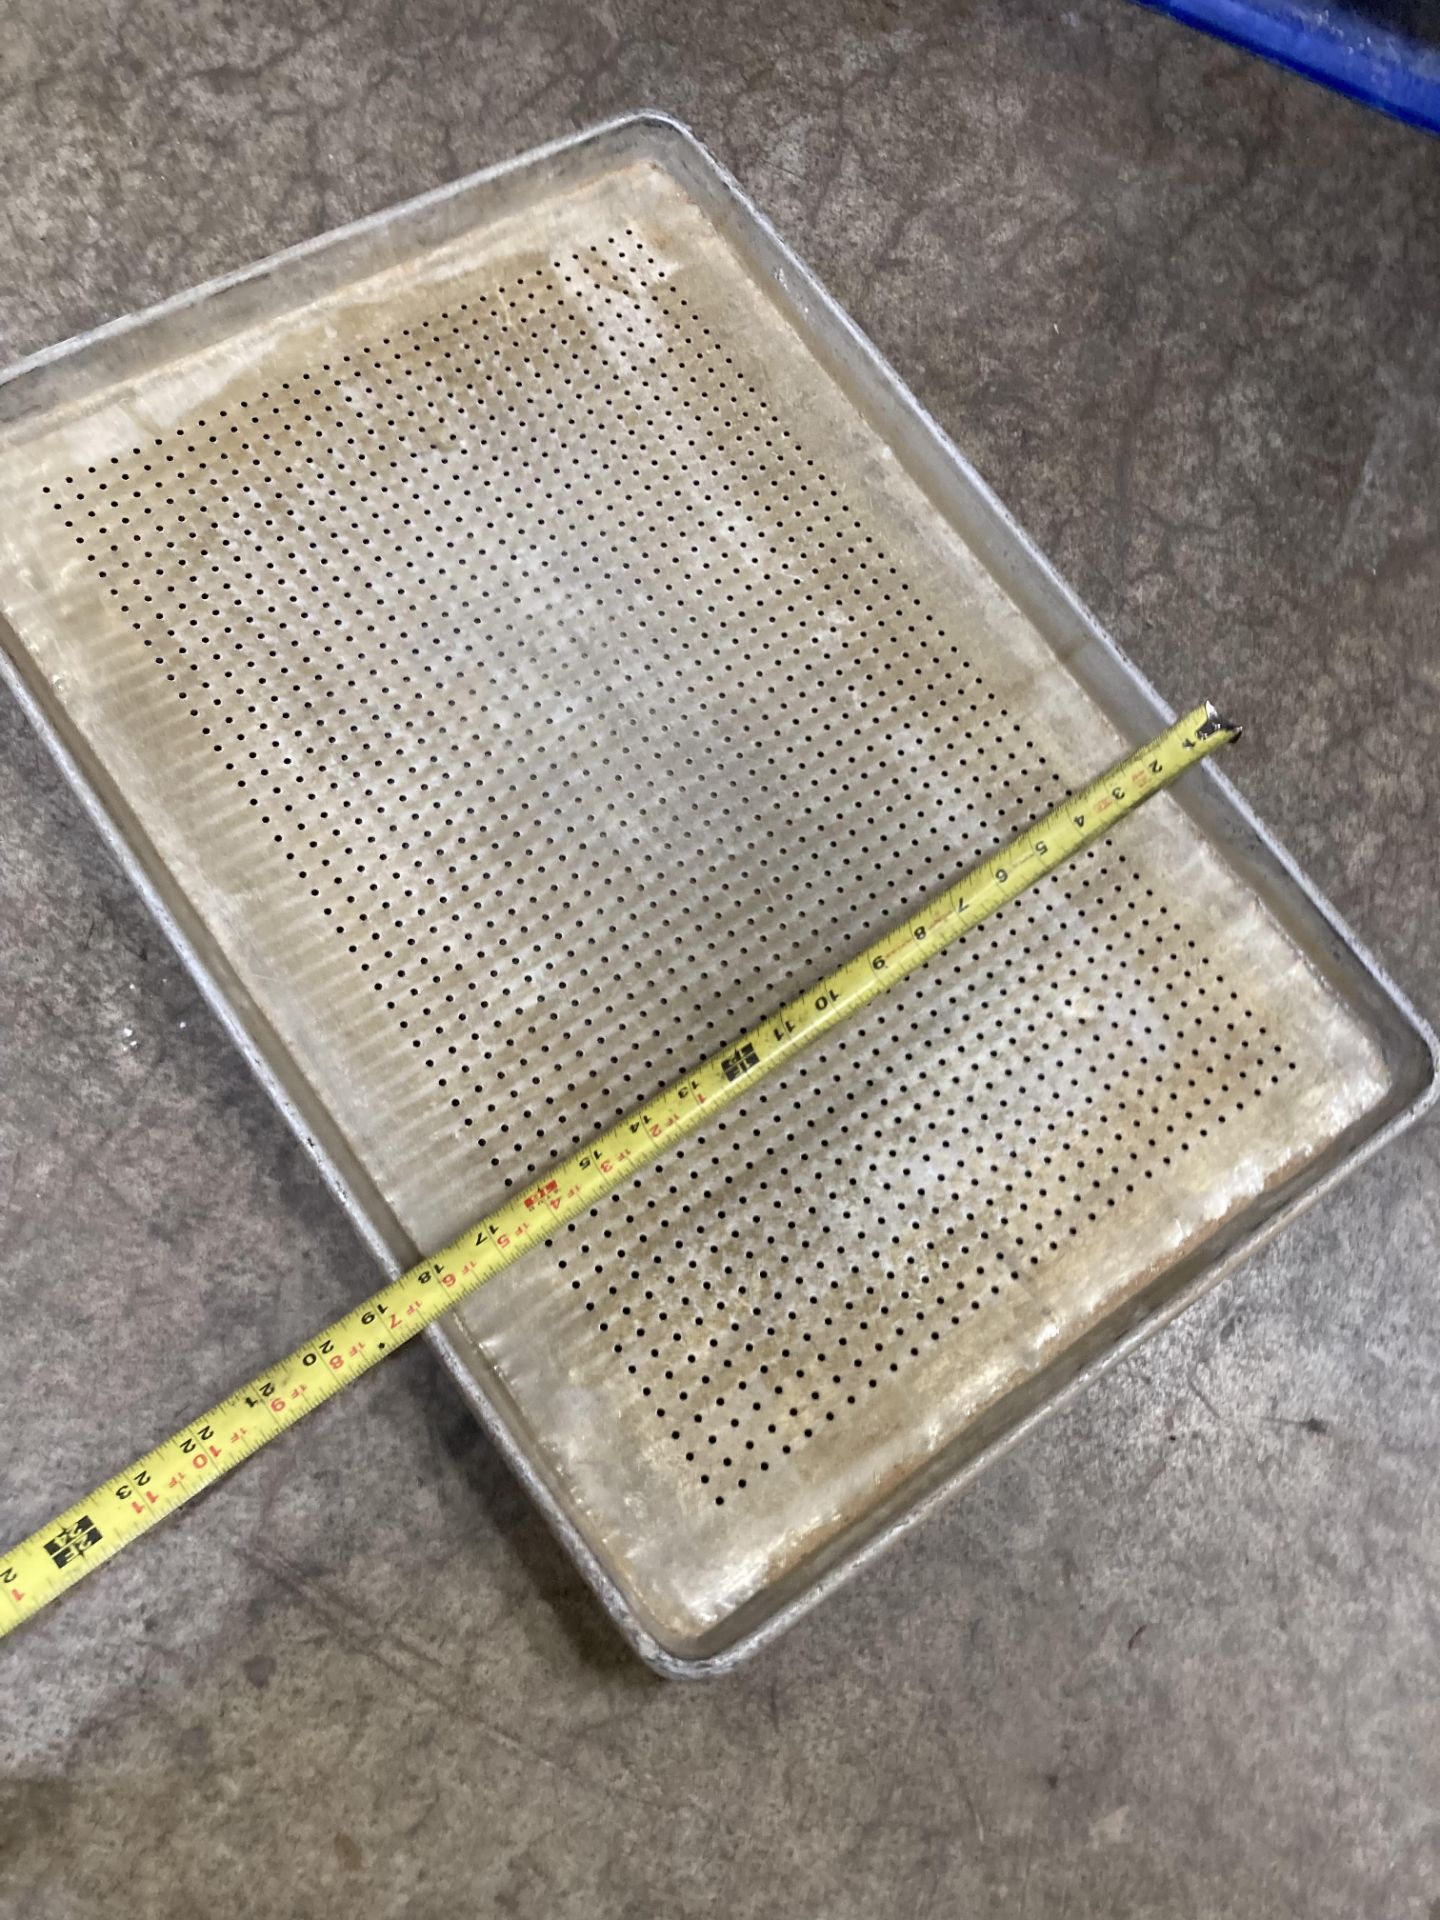 (LOT of approx 100) perforated hole sheet baking pan, 26 in x 18.5 in. ***RIGGING FEE of $75